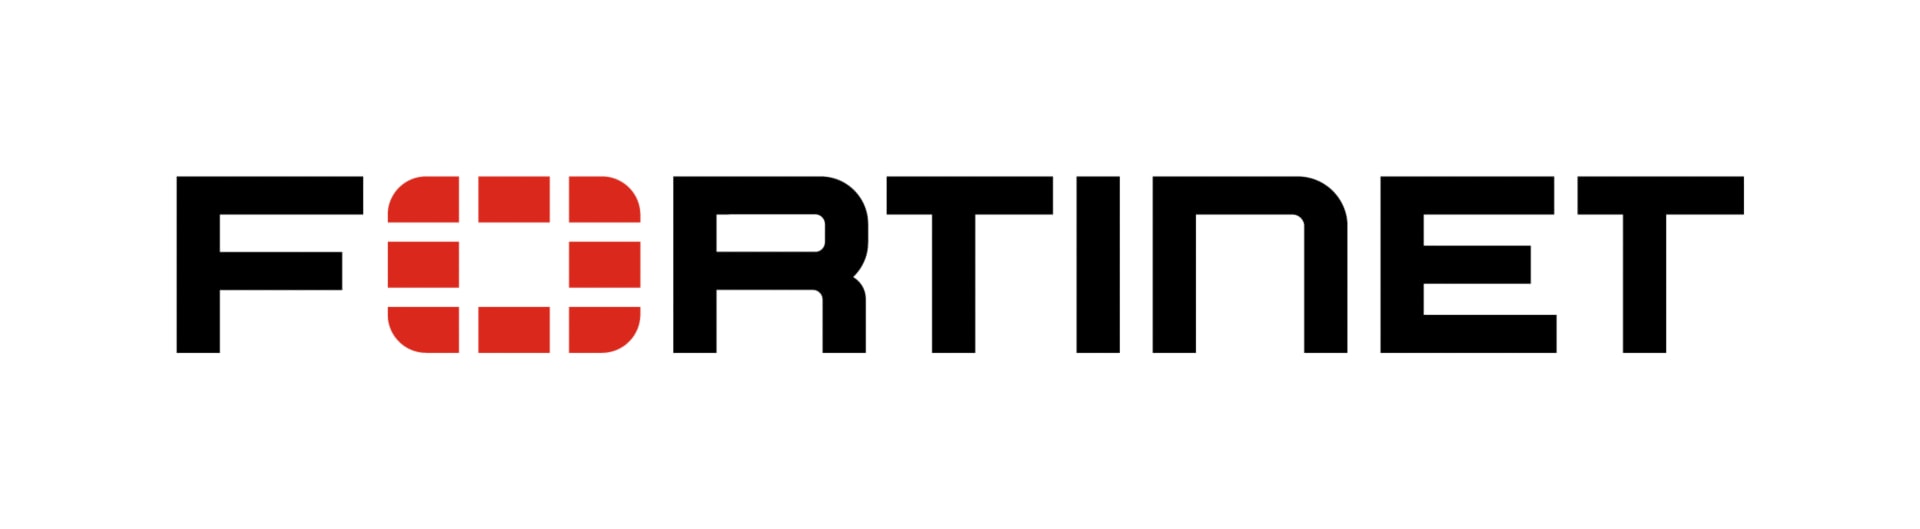 Fortinet Managed FortiClient VPN/ZTNA Agent and EPP/APT - subscription lice